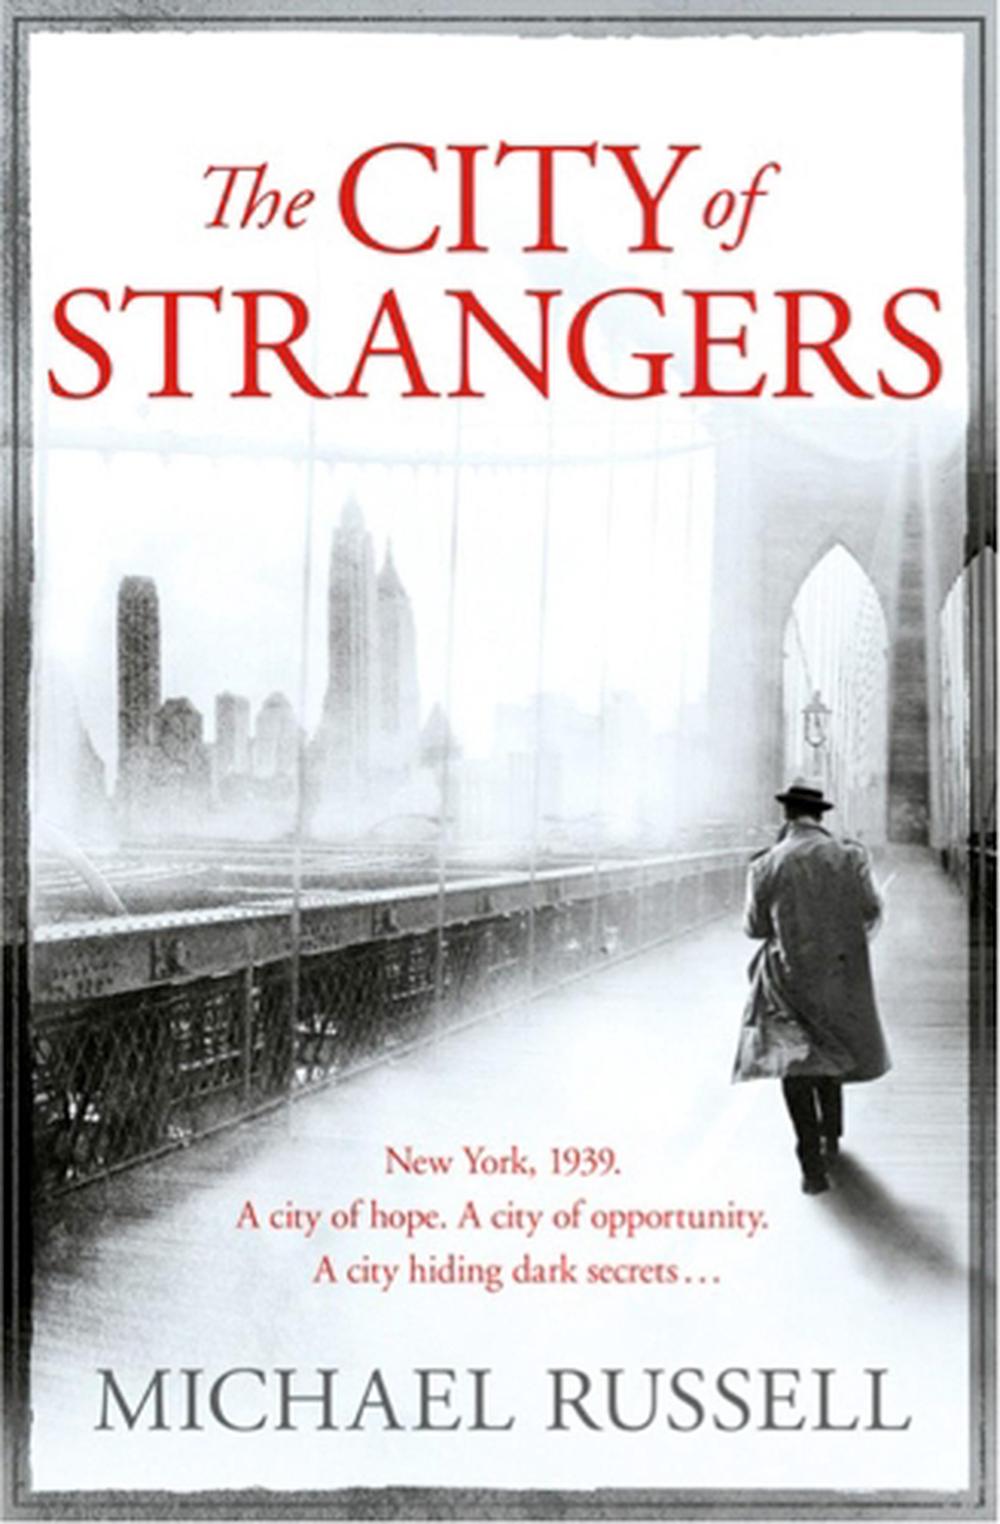 The City of Strangers by Michael Russell (English) Paperback Book Free ...